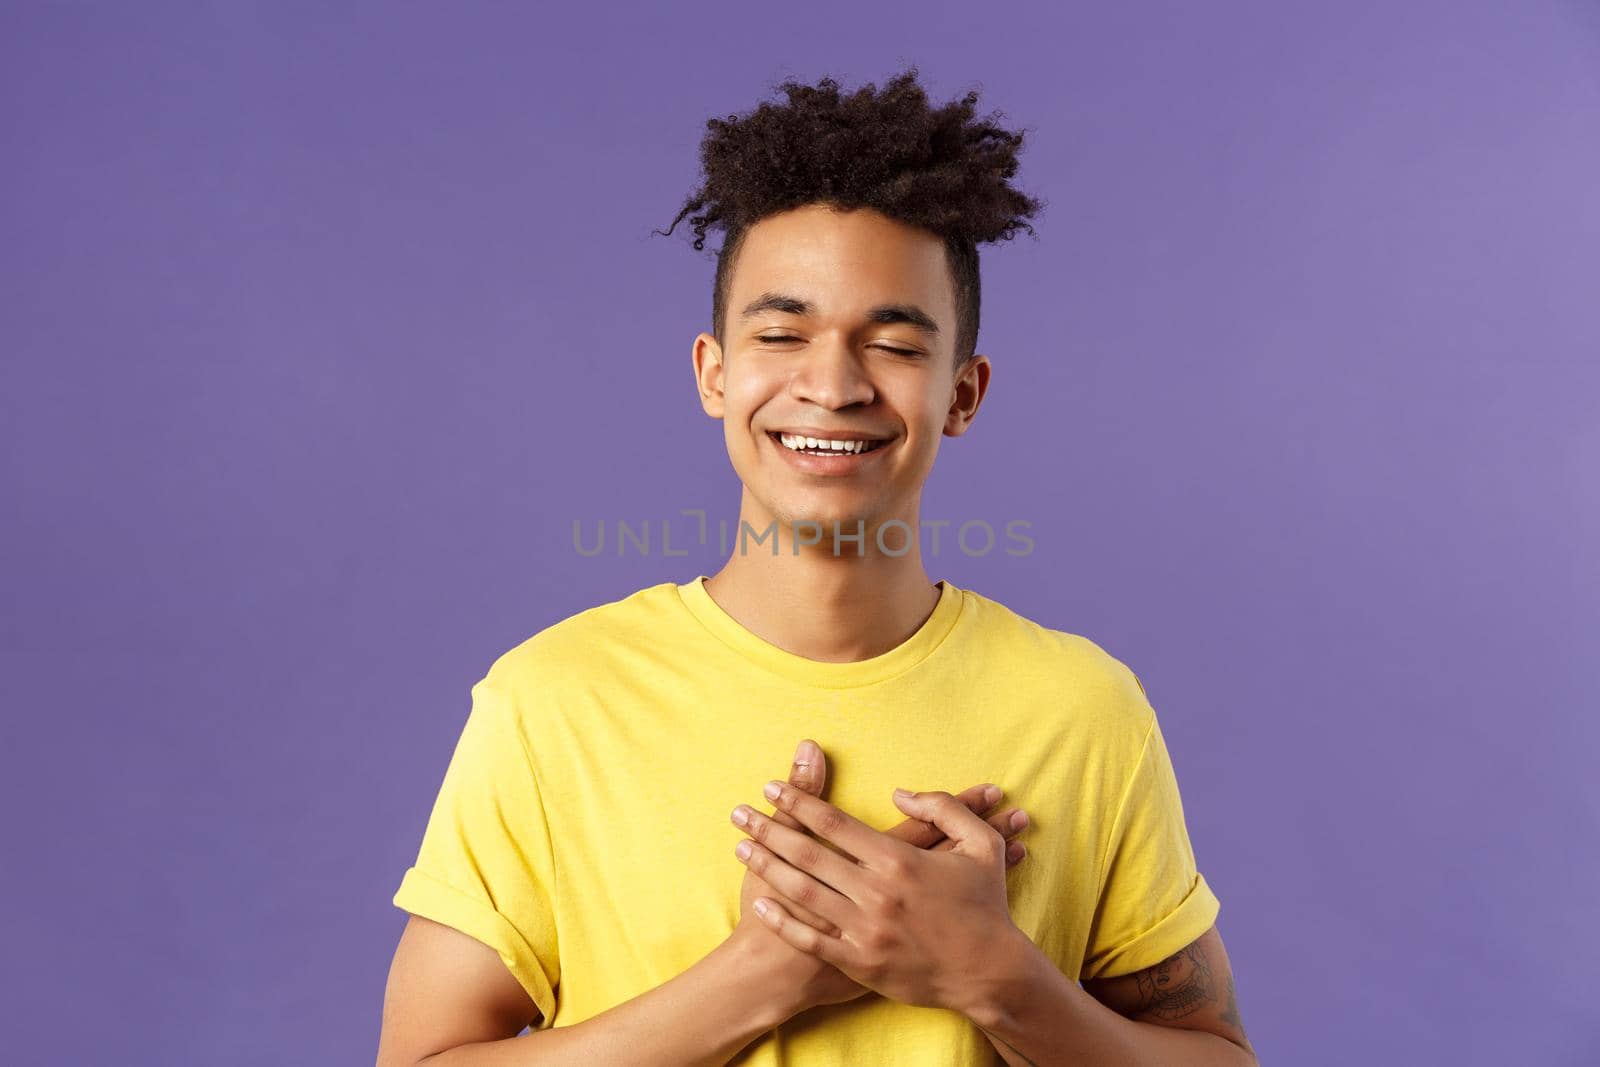 Close-up portrait of happy, upbeat young dreamy guy, remember sweet memories, hold hands on heart, smiling touched and delighted, close eyes grinning, recall romantic moment.